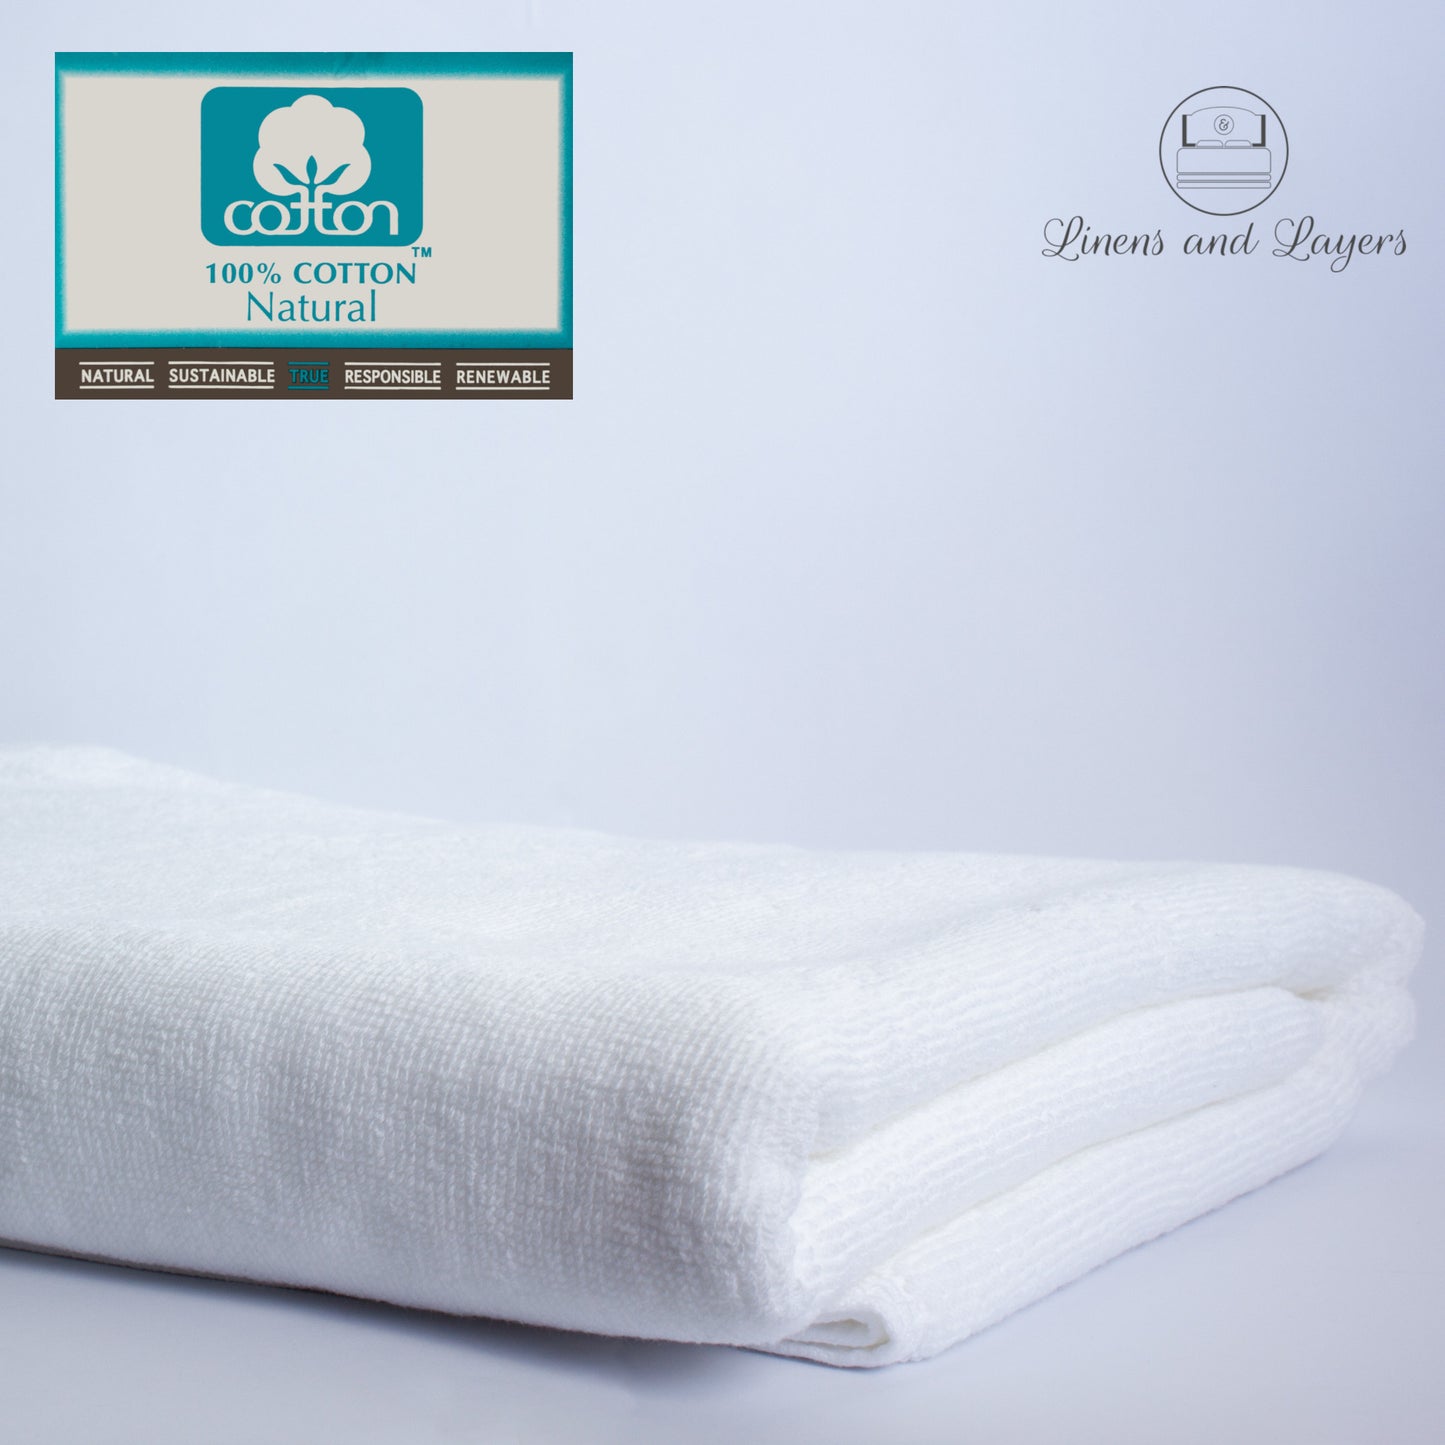 Hotel Quality White Bath Towel (558 GSM) - Pure Cotton Terrycloth - 25x50 inches